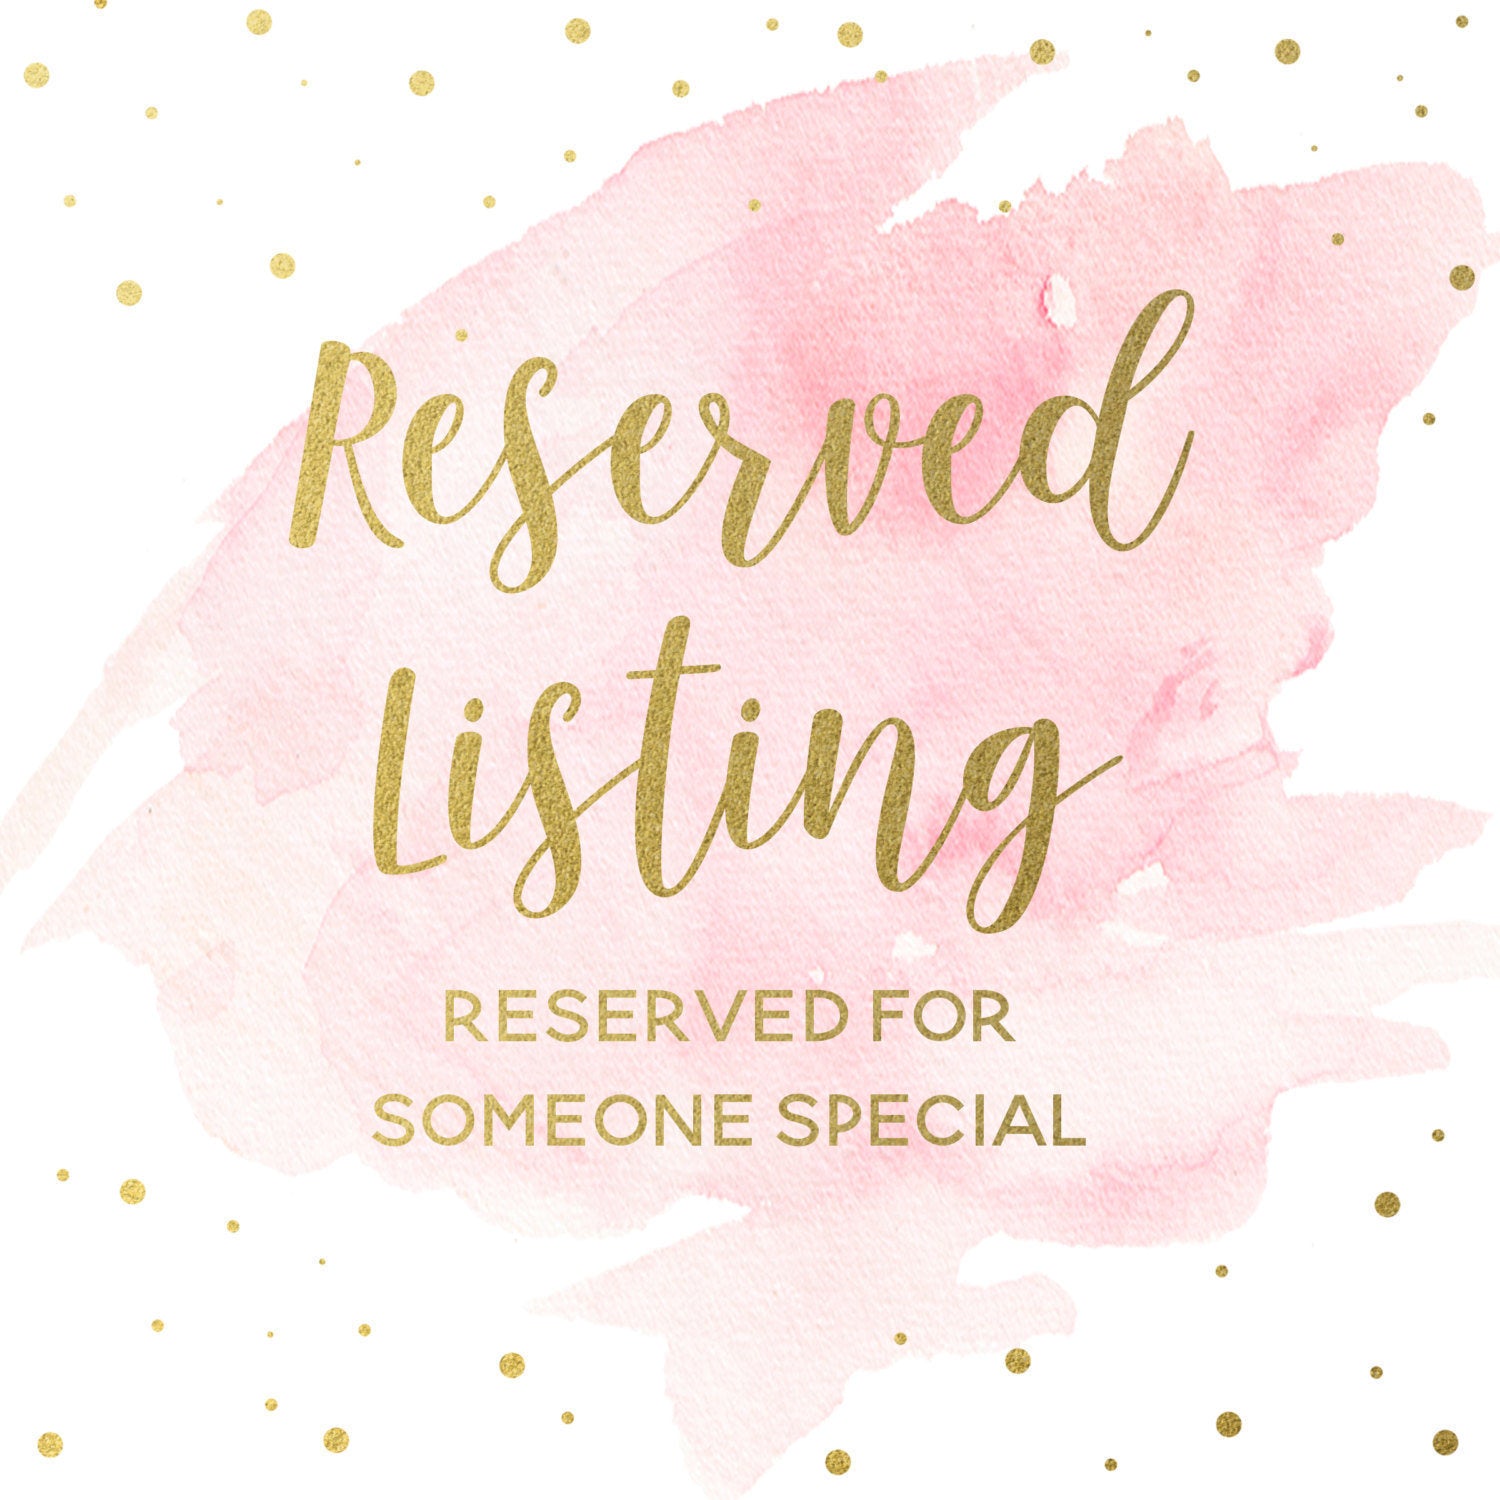 Reserved Listing - Dayna A.